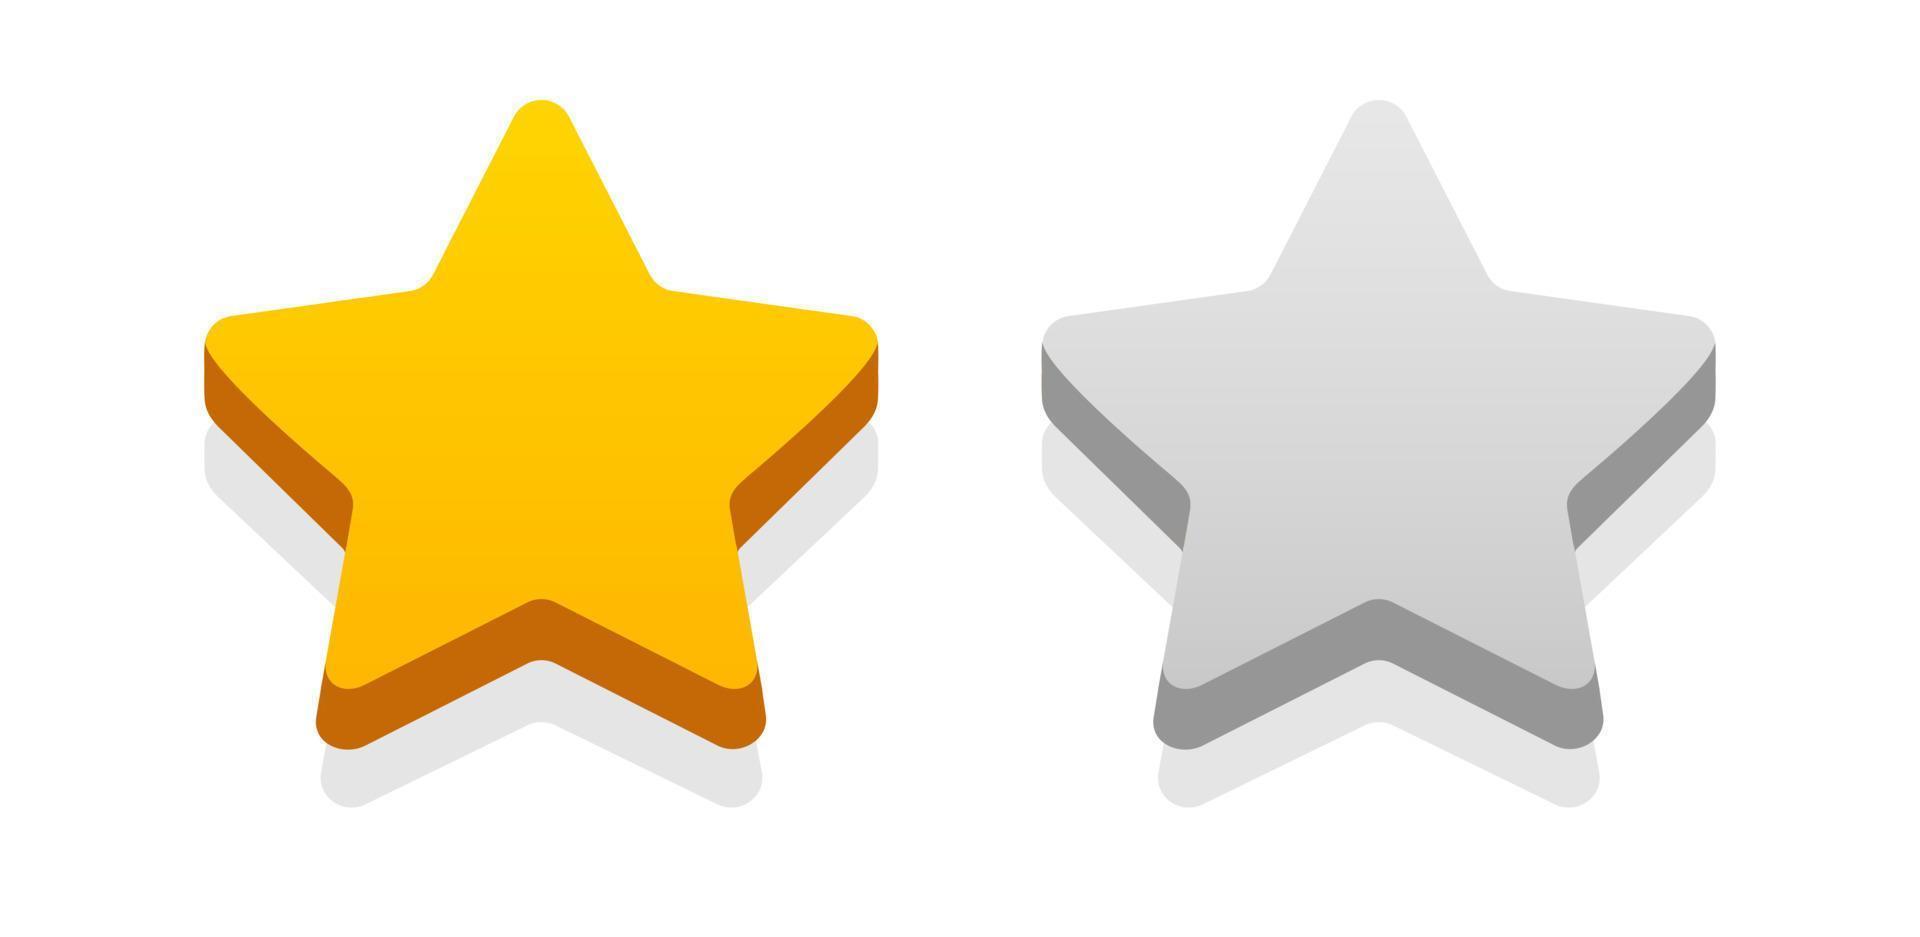 Star gold and silver 3d vector style